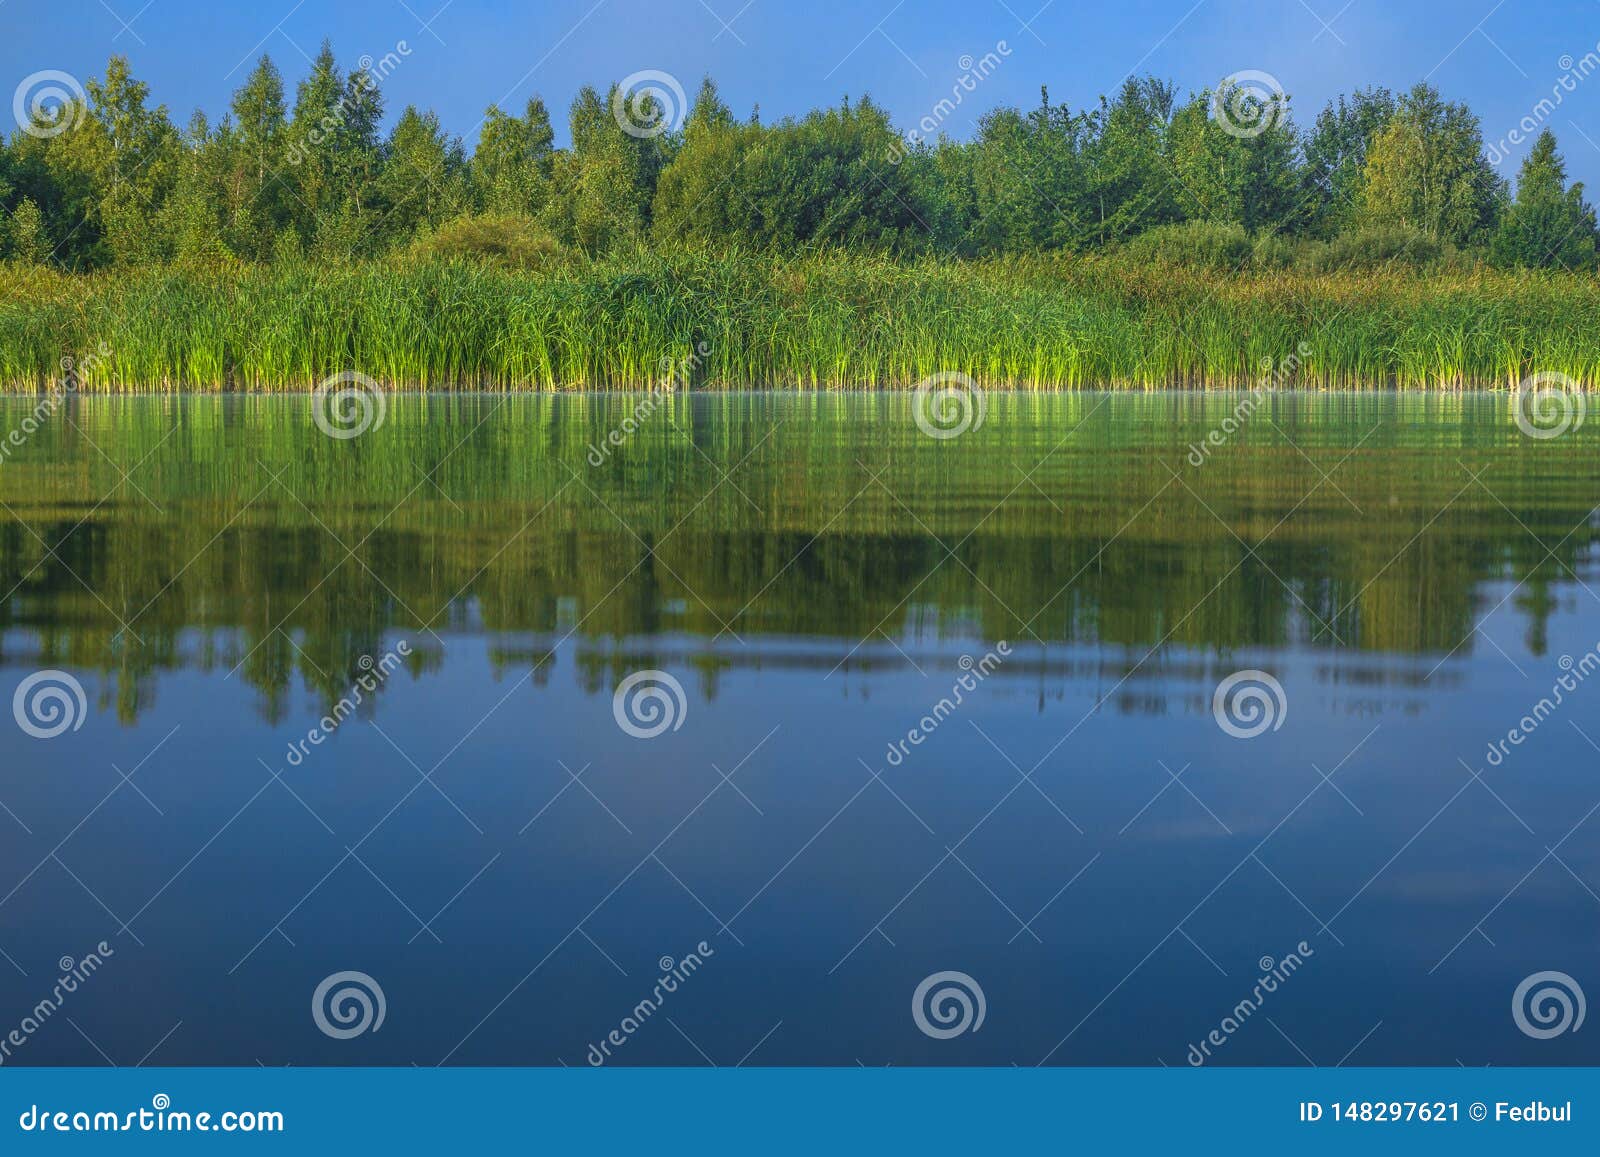 Simple Landscape of Lake with Shore Reflection Stock Image - Image of ...